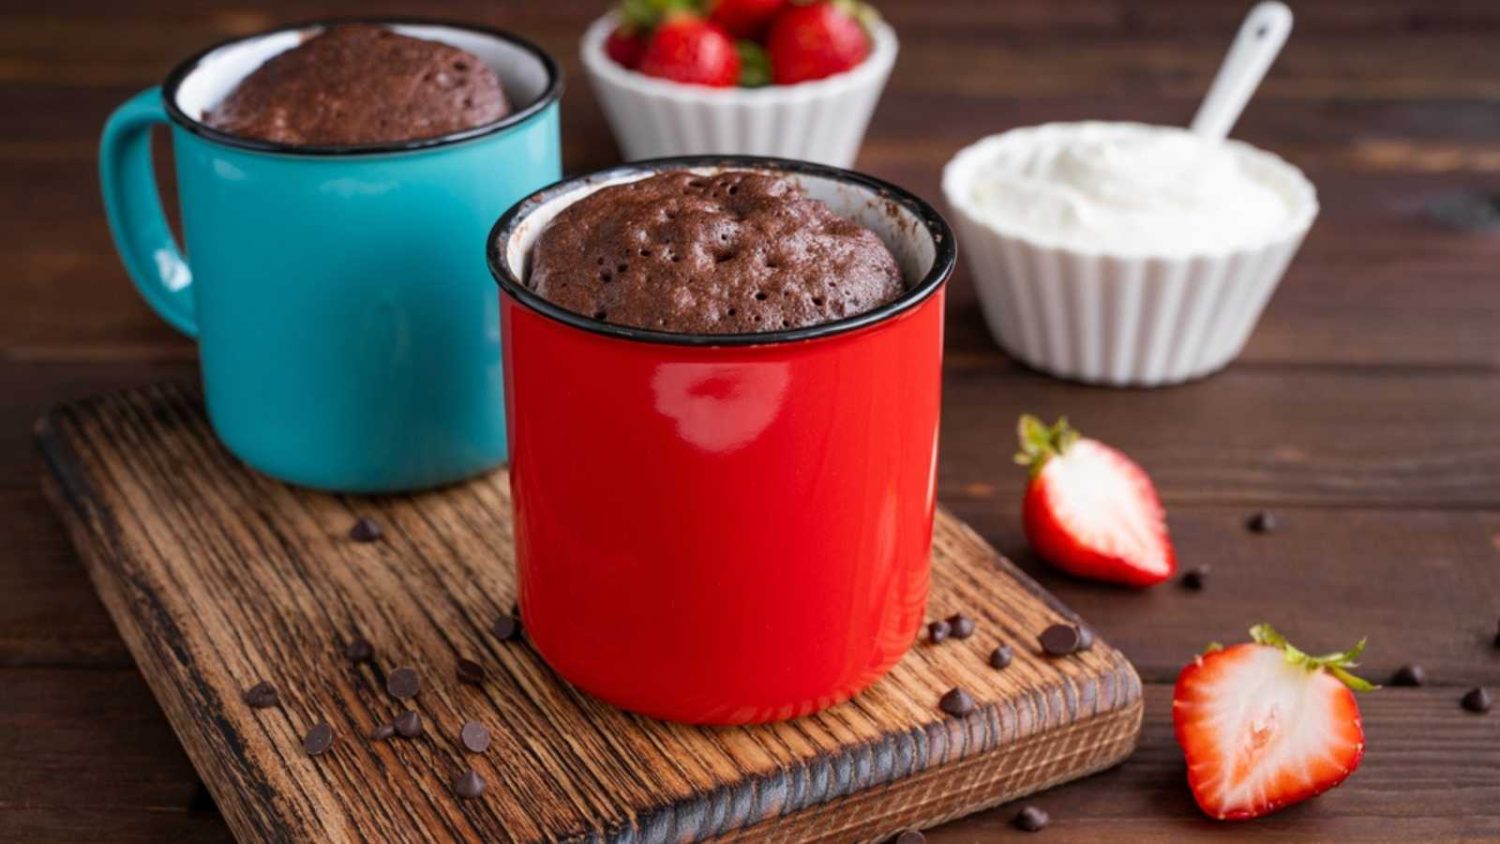 Cake in cup